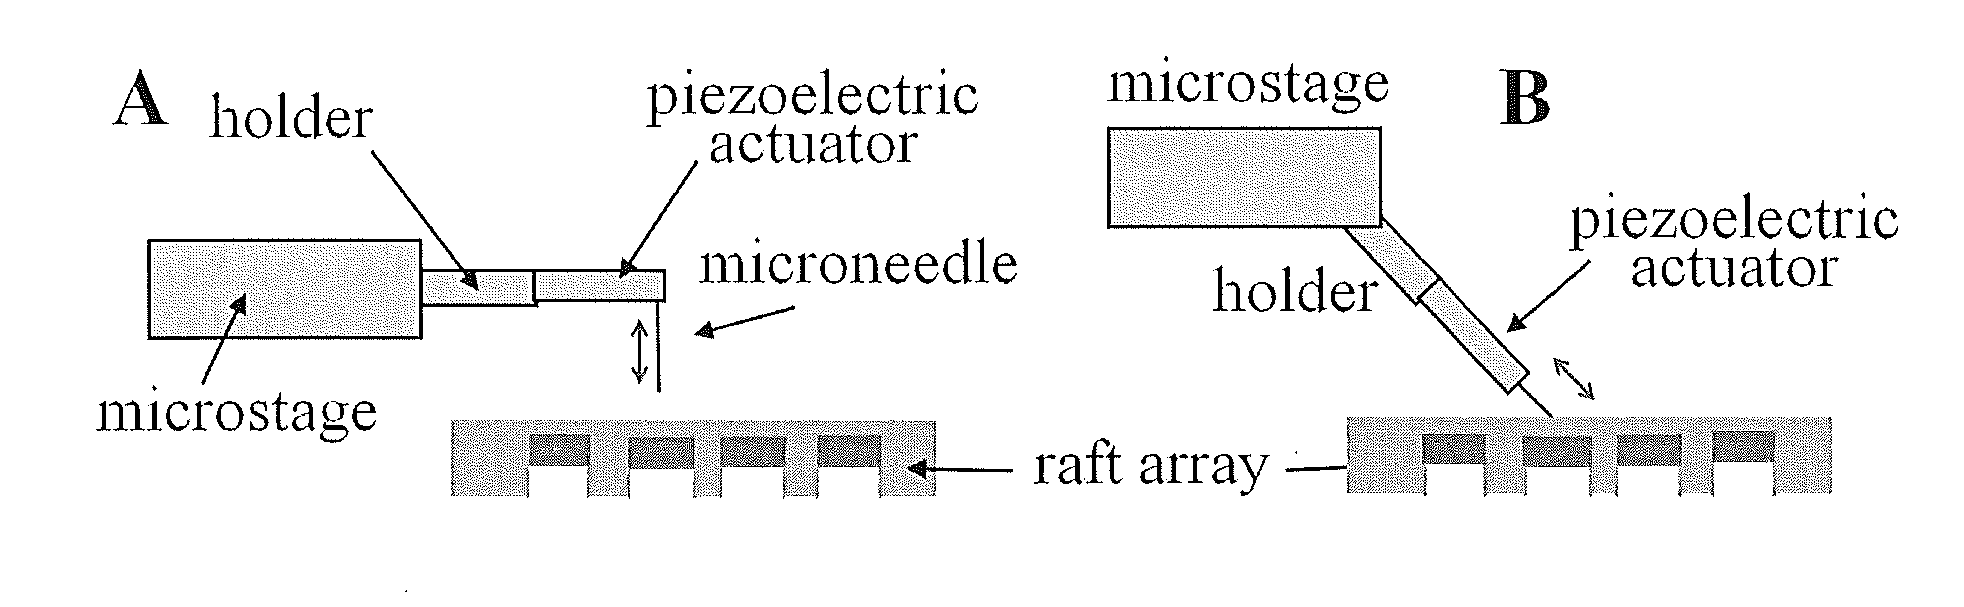 Array of micromolded structures for sorting adherent cells